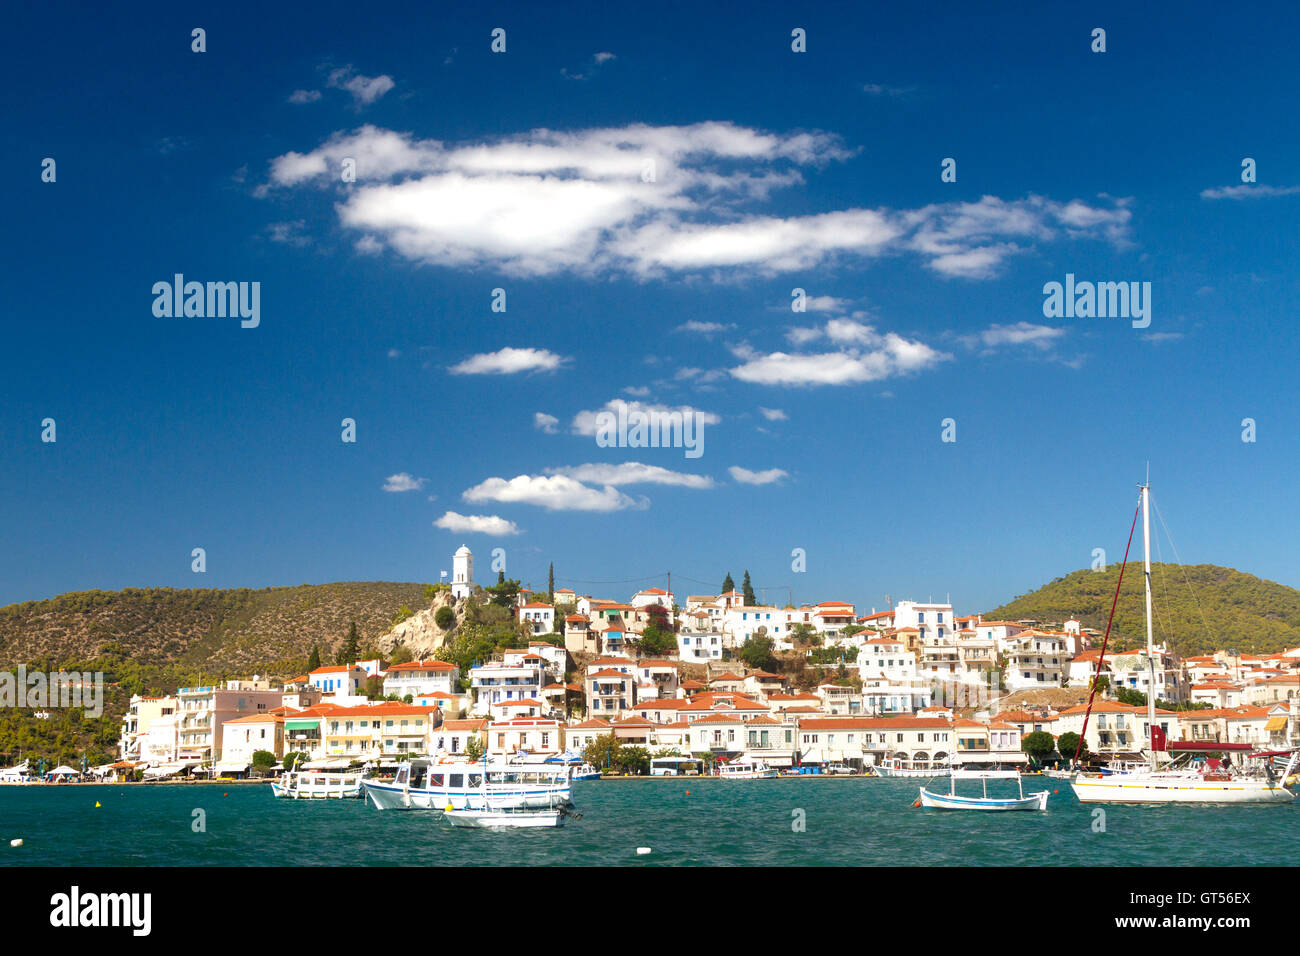 View of Poros town, Poros island, as seen from the coast of Galatas, in Peloponnese region, in Greece. Stock Photo